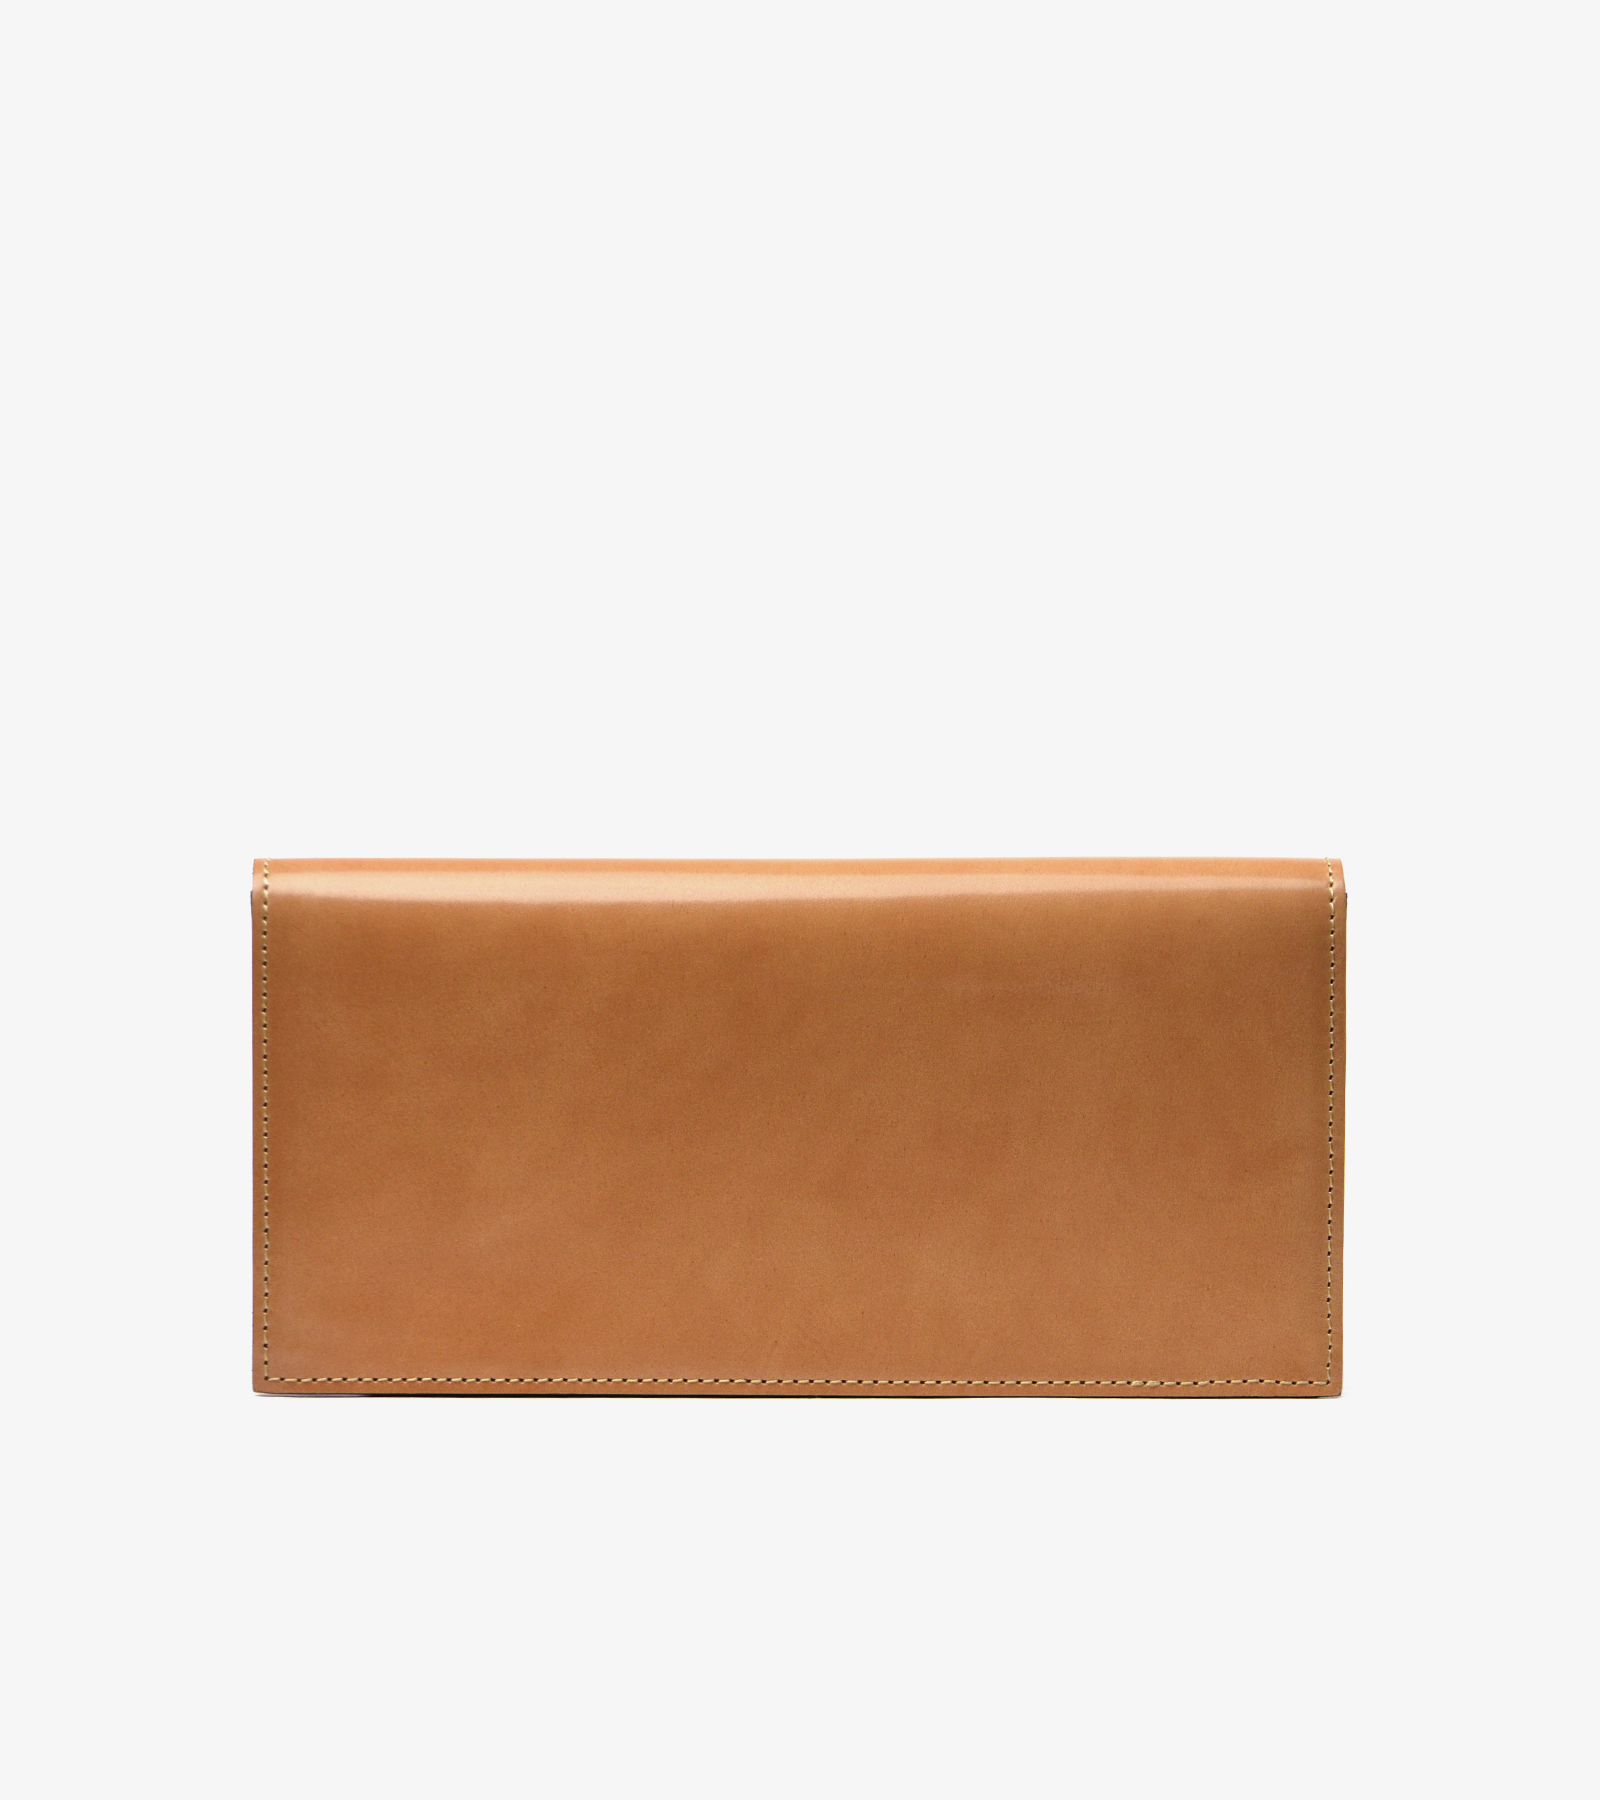 CORDOVAN LONG WALLET2 / The Warmthcrafts Manufacture Web Store